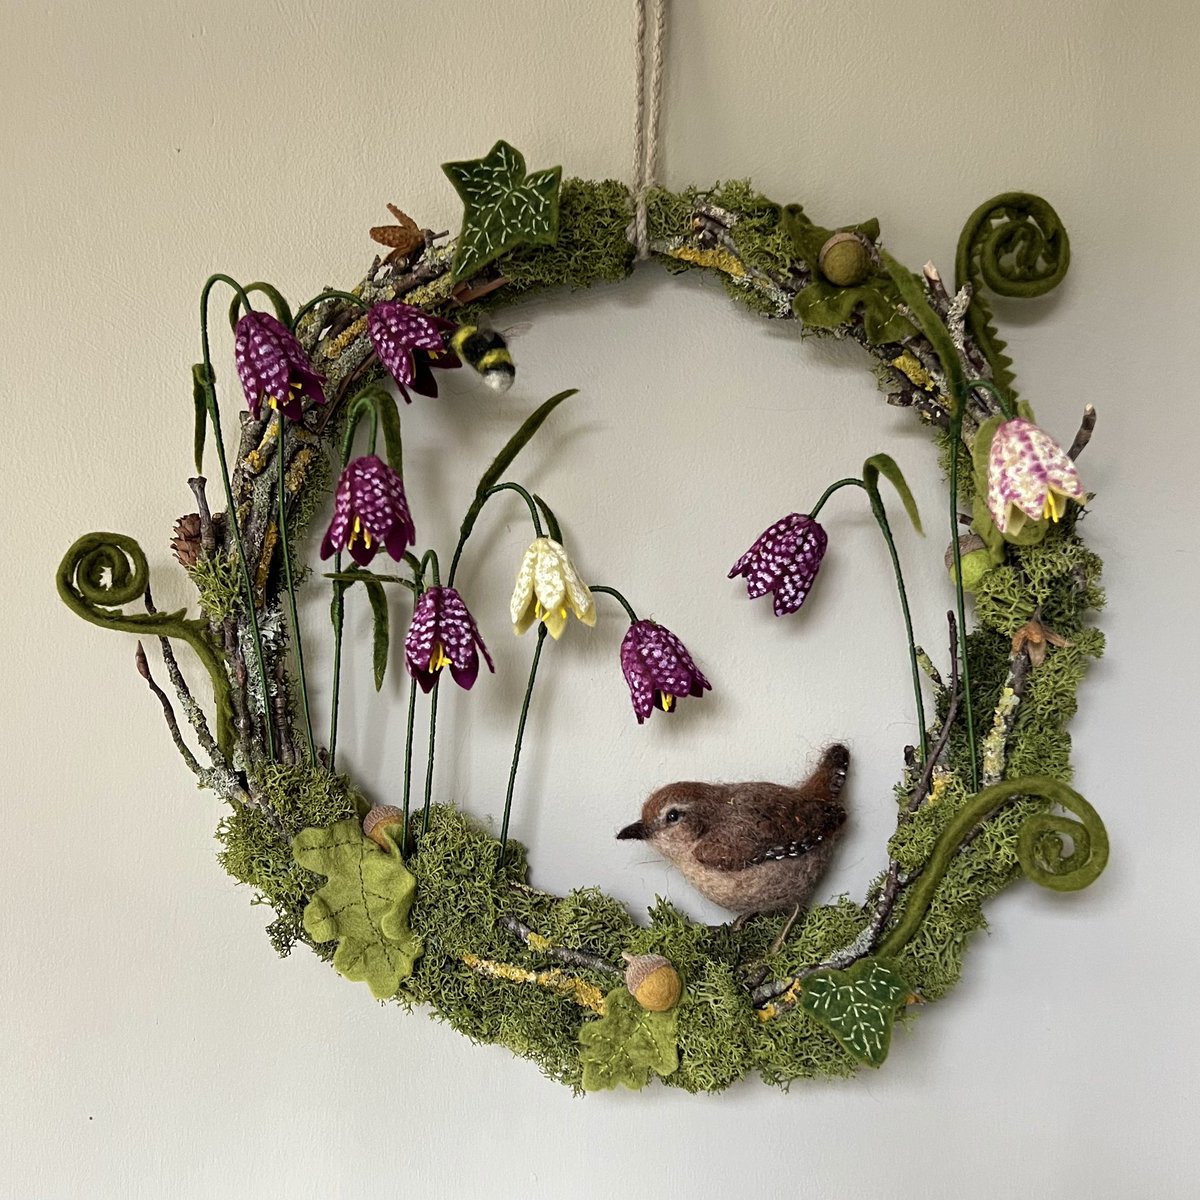 The finished piece … “wren in the fritillaries” which is a #springwreath. I wanted to capture the feeling of a magical forest floor with wild fritillaries in amongst old oaks & ivy
#needlefeltedjennywren #needlefeltedbee #choosewool #campaignforwool #woolart #madeinBath